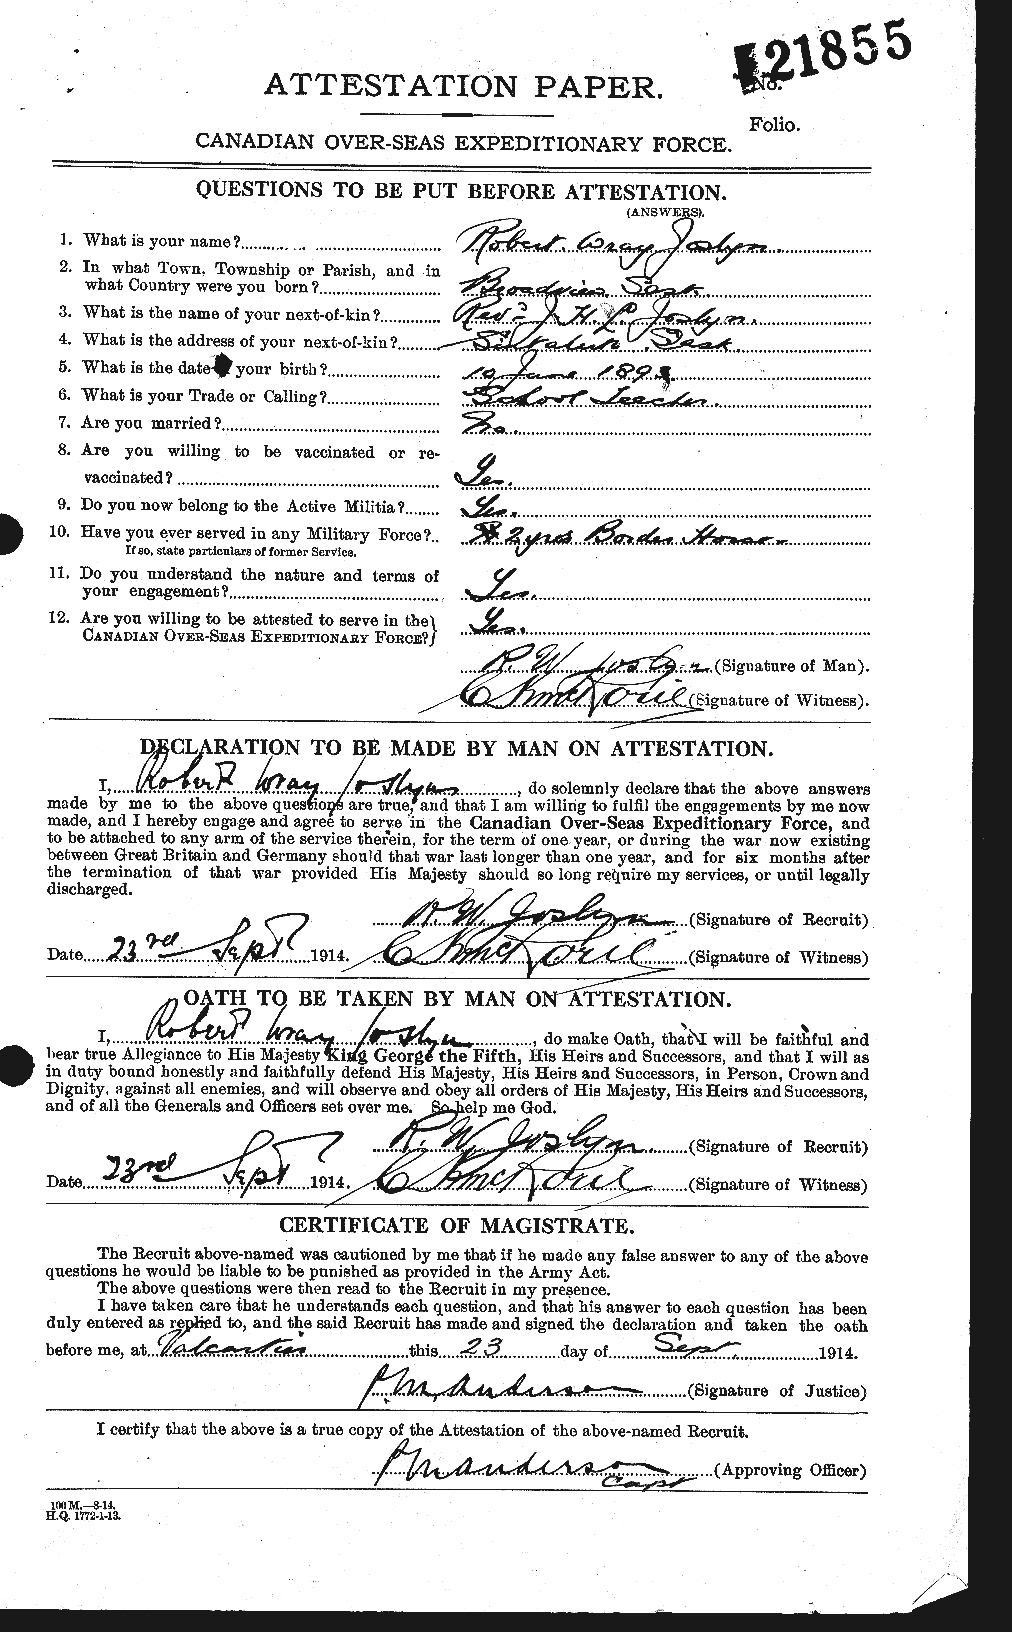 Personnel Records of the First World War - CEF 426178a